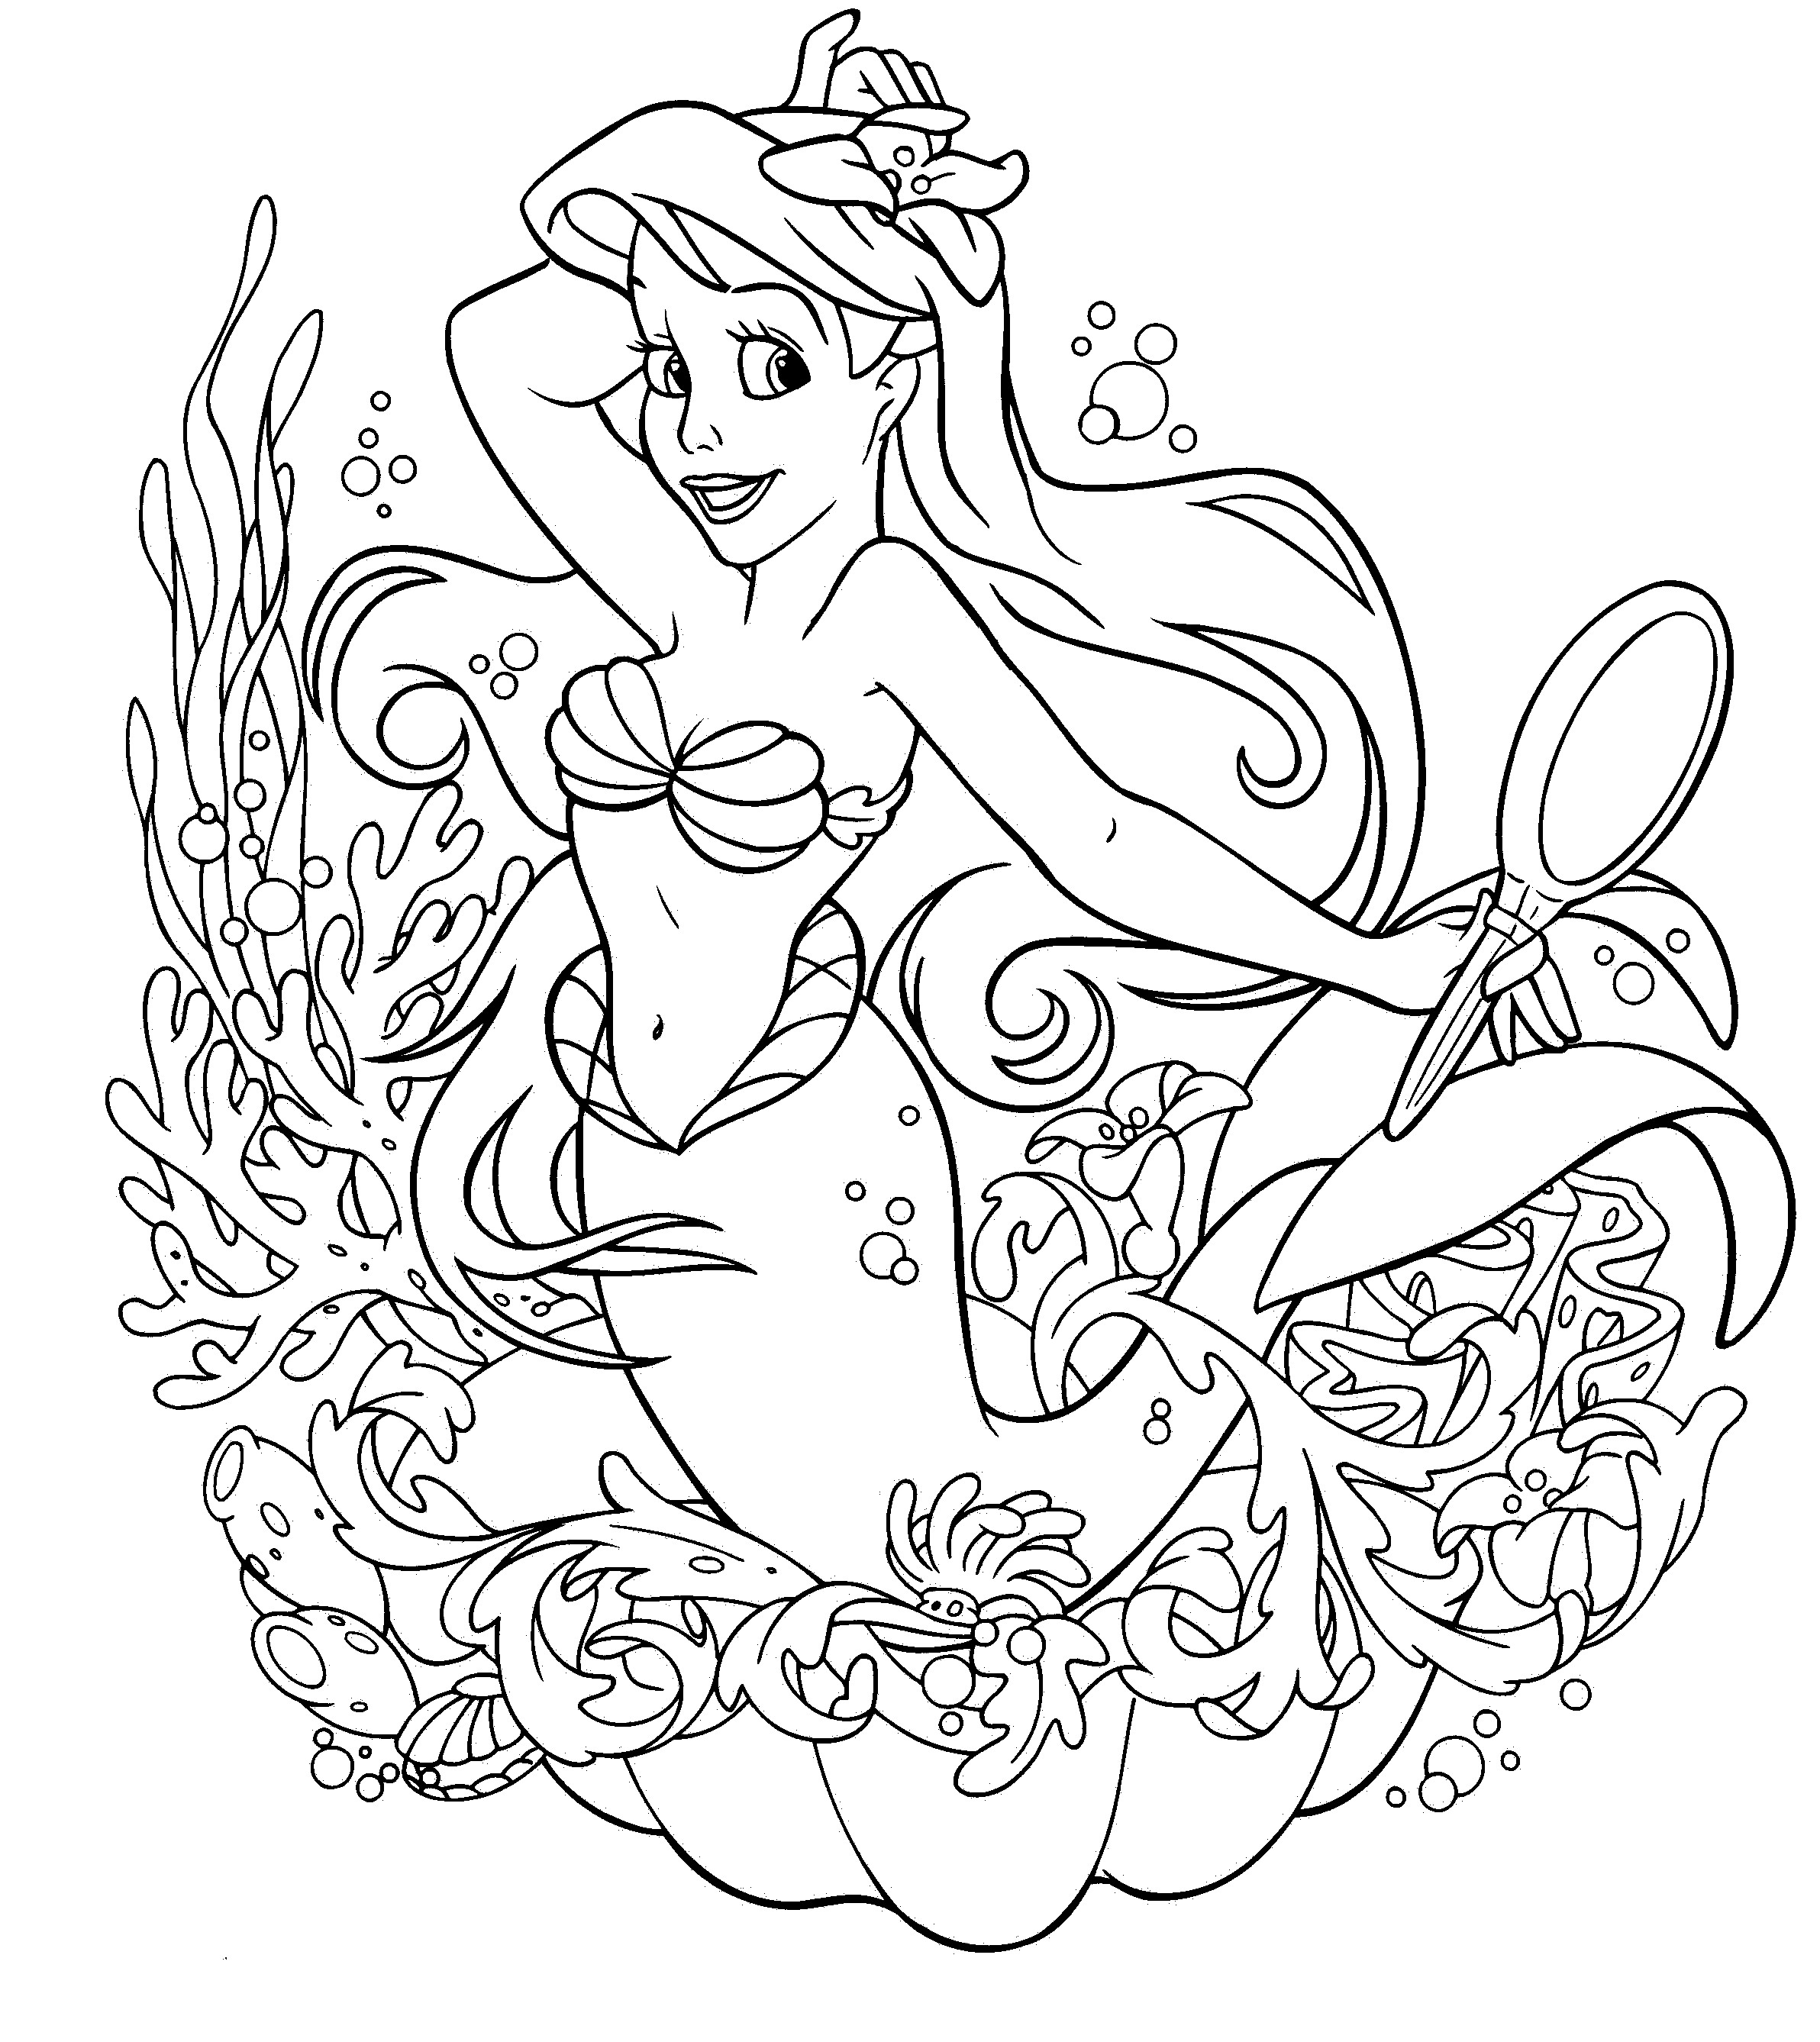 Adult Coloring Pages Disney
 disney princess colouring